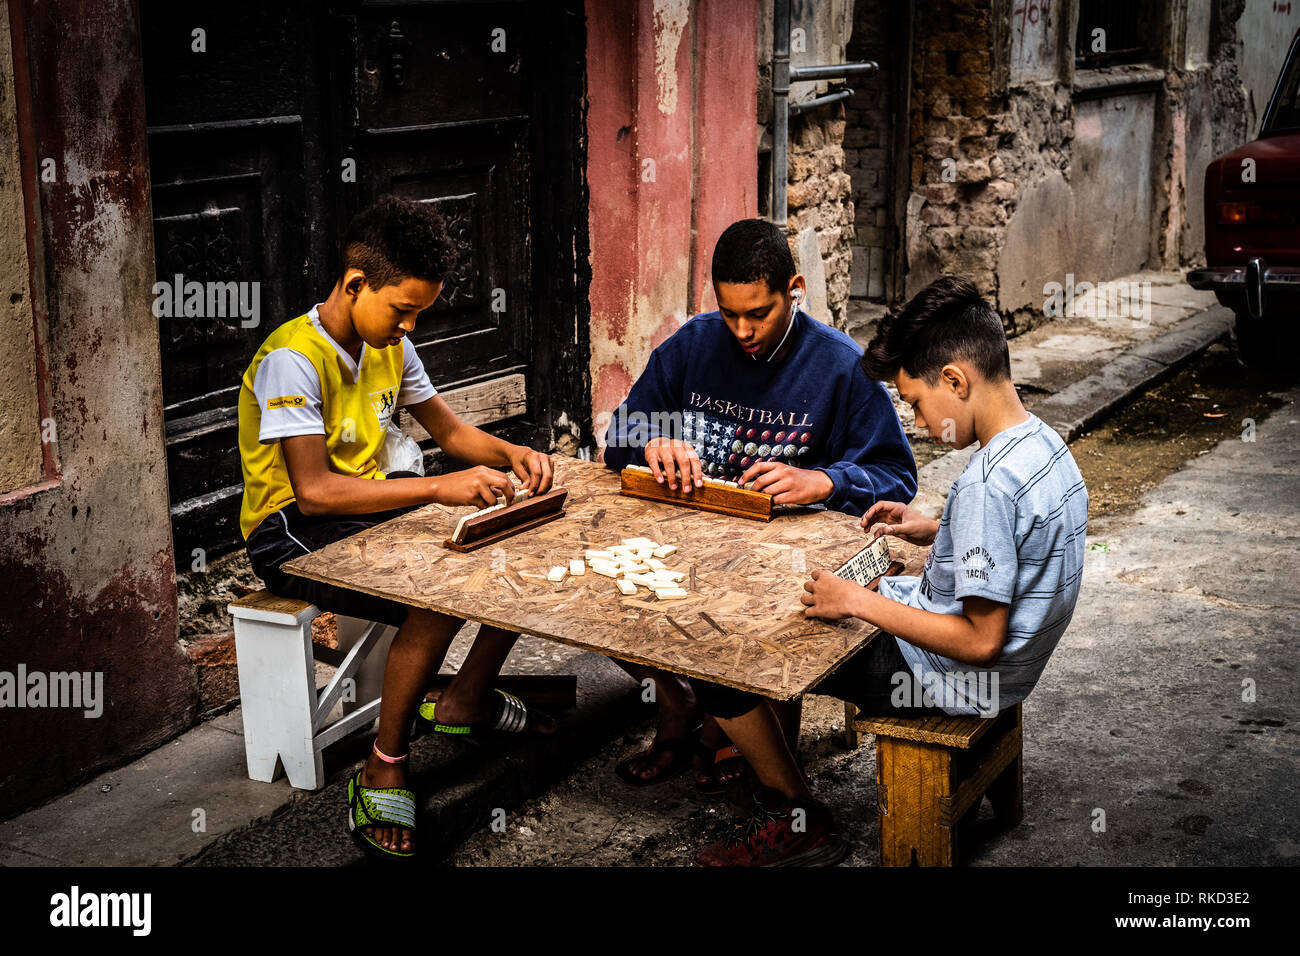 Three kids playing a board game on a wooden plate in the streets of Havana, Cuba. Stock Photo